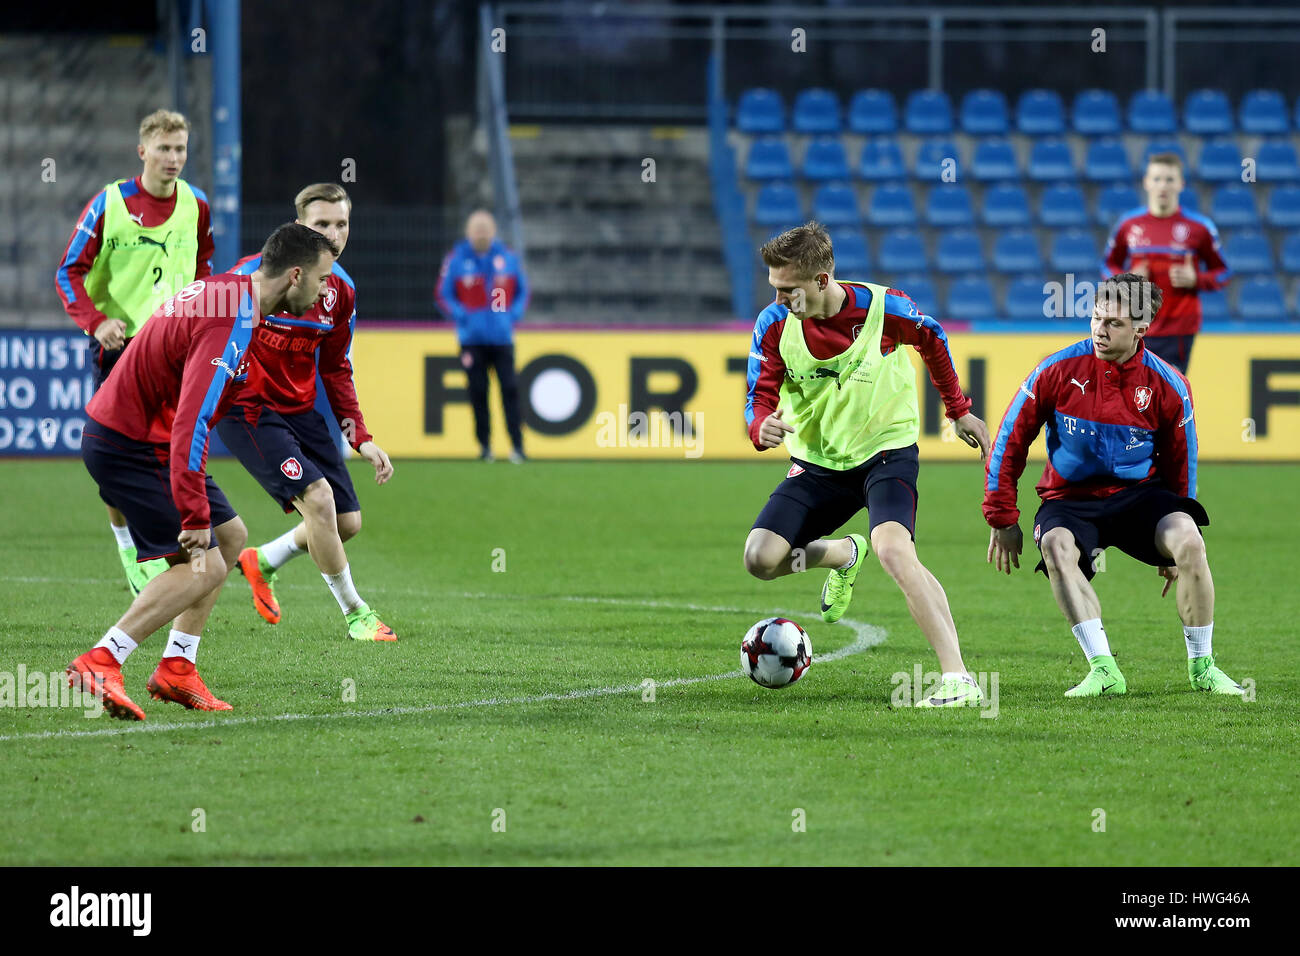 Usti Nad Labem, Czech Republic. 21st Mar, 2017. Czech national football team player Borek Dockal (2nd right with ball) in action during the training session in Usti nad Labem, Czech Republic, March 21, 2017 prior to the friendly with Lithuania on Wednesday and qualifier for the World Championship between Czech Republic and San Marino on Sunday, March 26, 2017. CTK Photo/Ondrej Hajek) Stock Photo